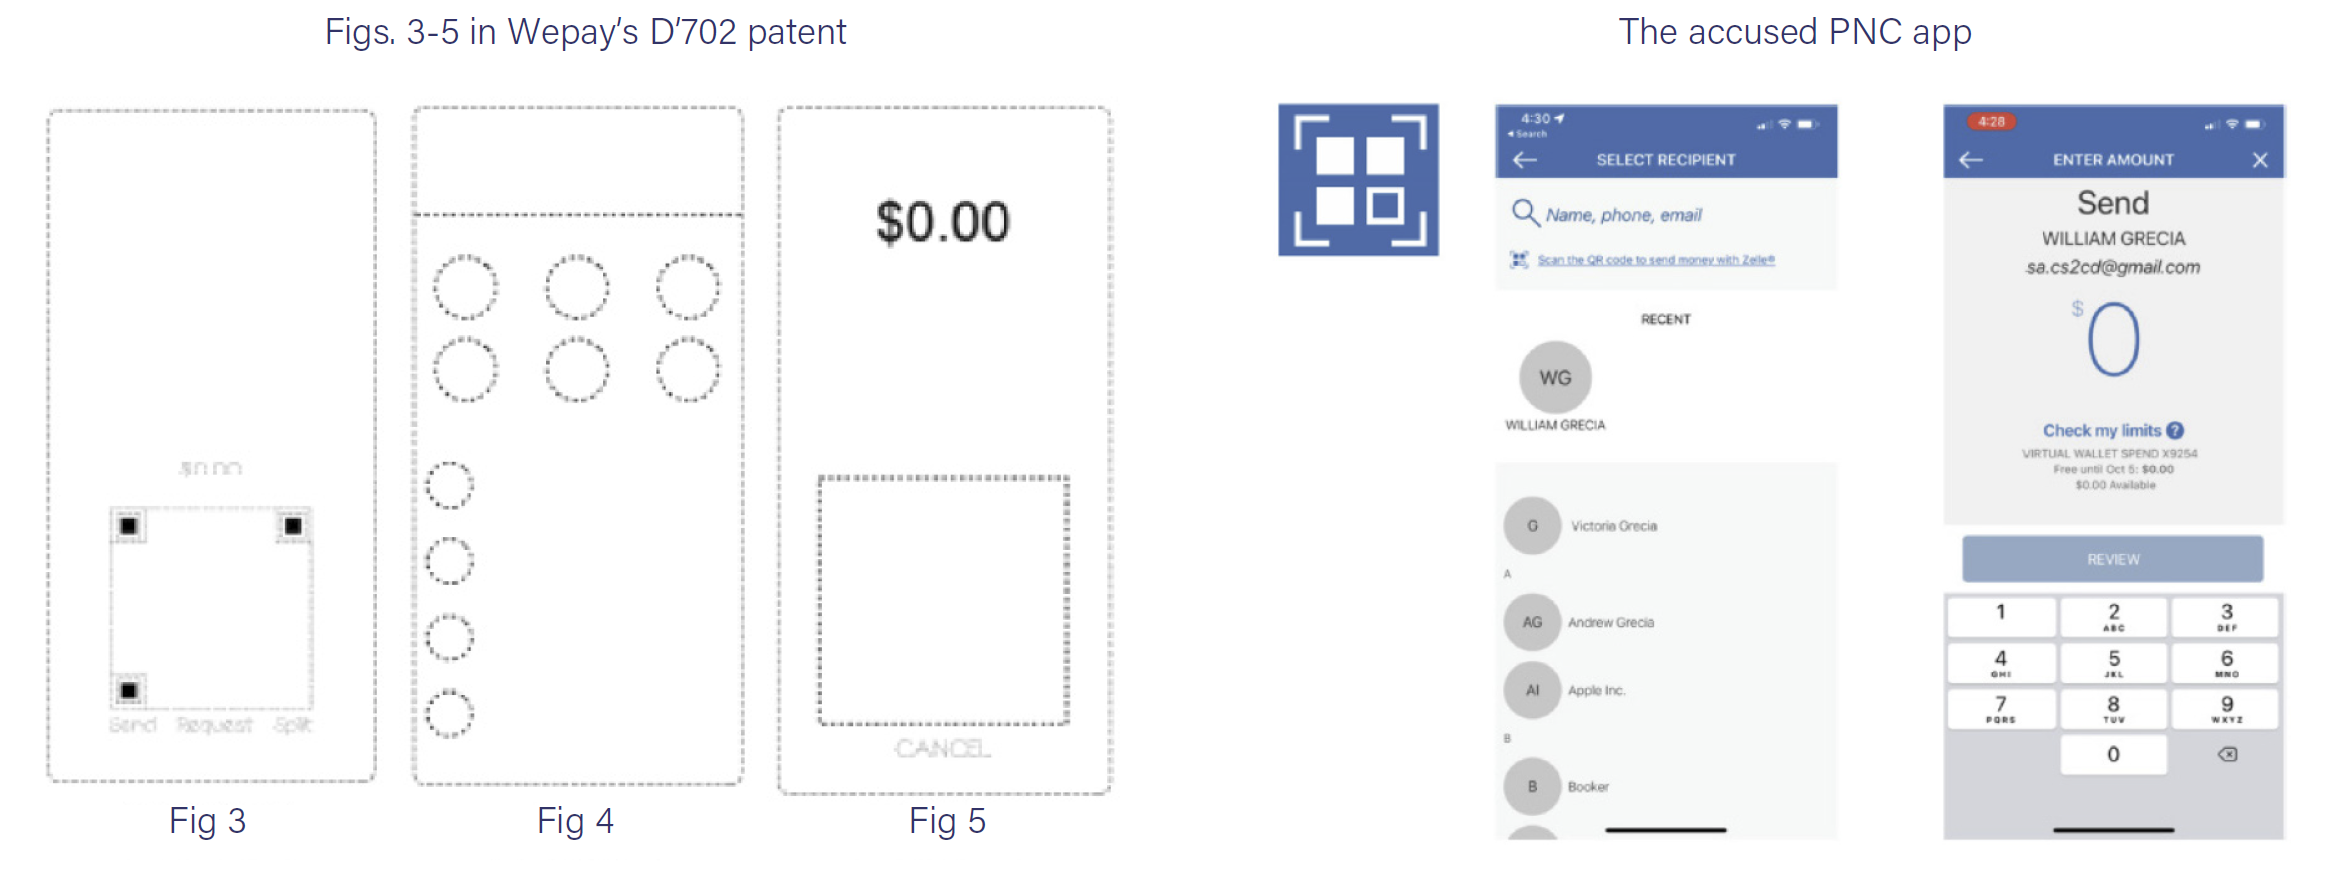 design patent and accused PNC app